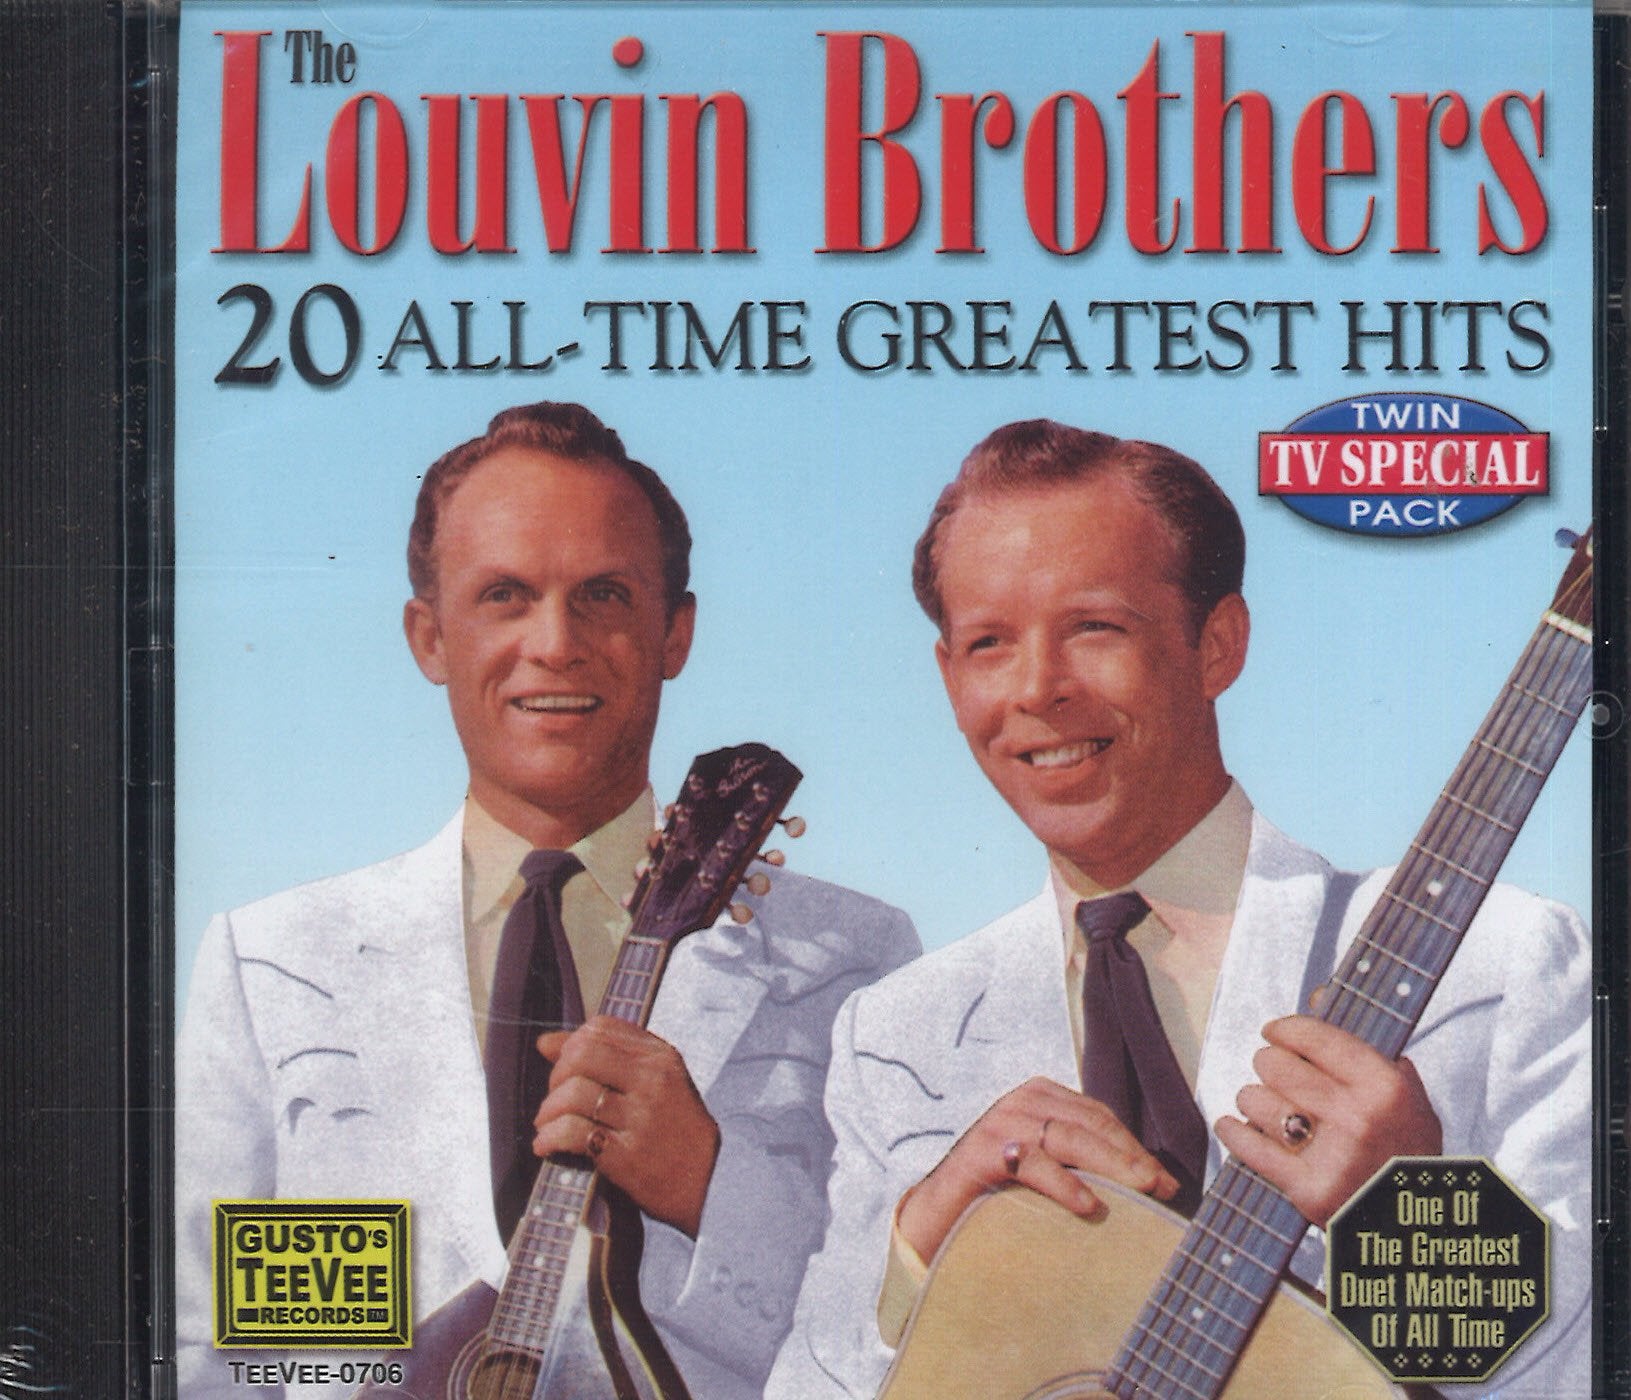 The Louvin Brothers 20 All-Time Greatest Hits